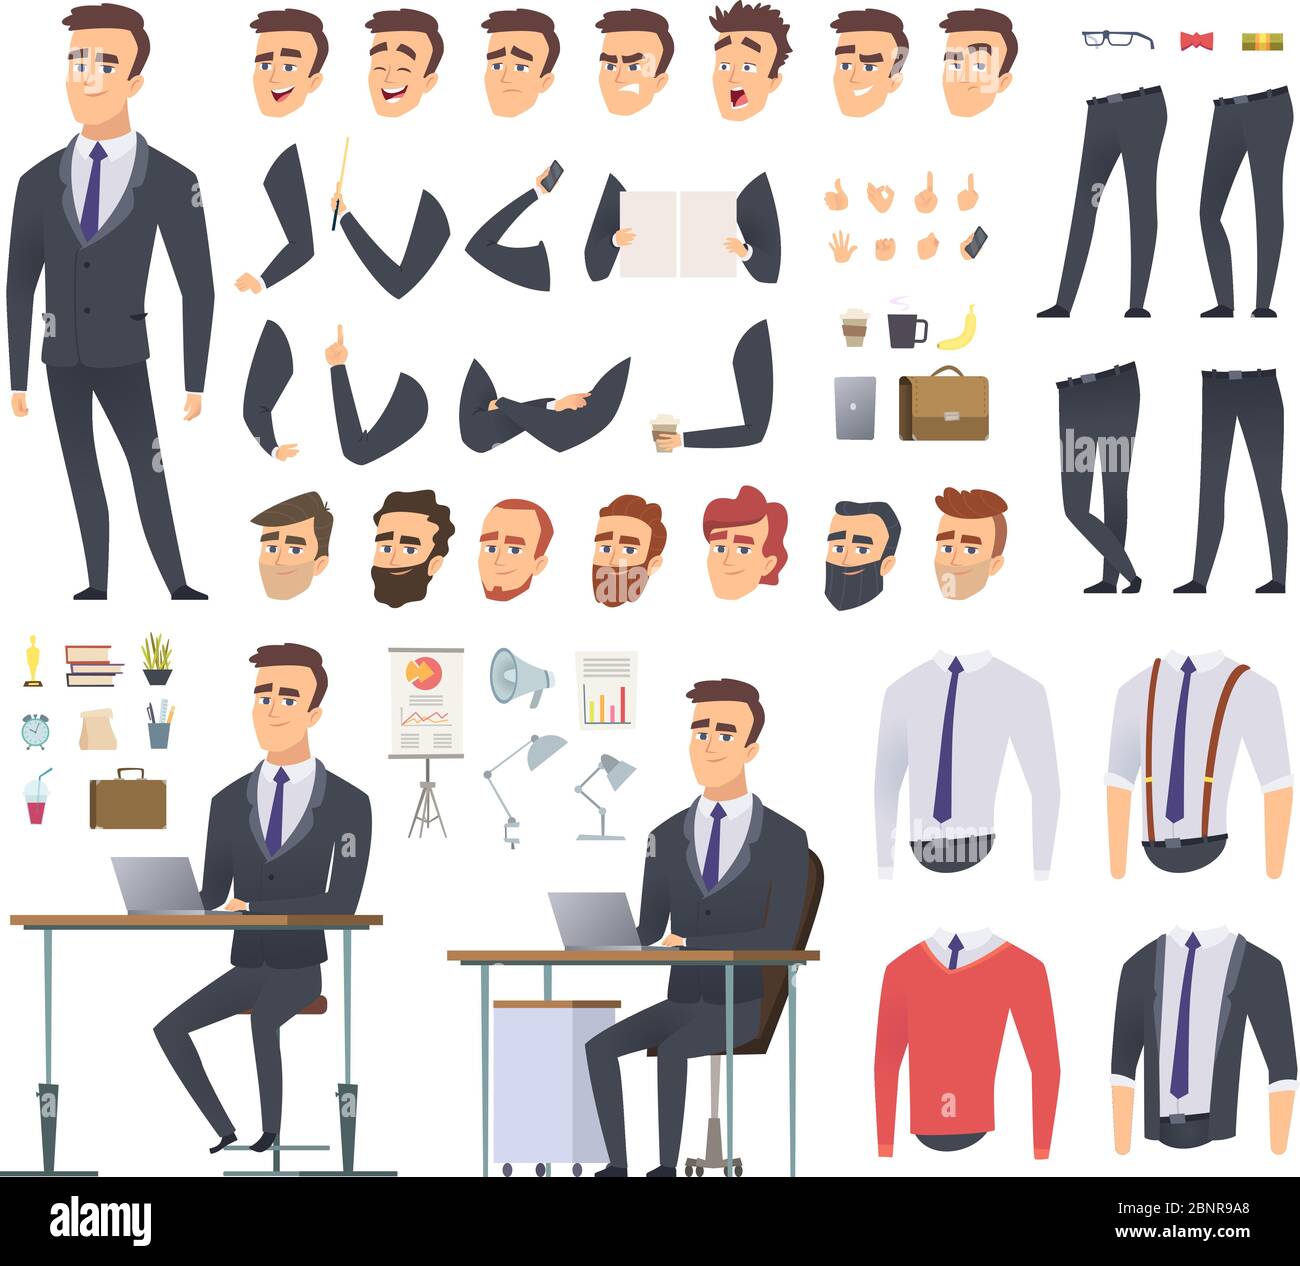 Manager creation kit. Businessman office person arms hands clothes and items vector male character animation project Stock Vector